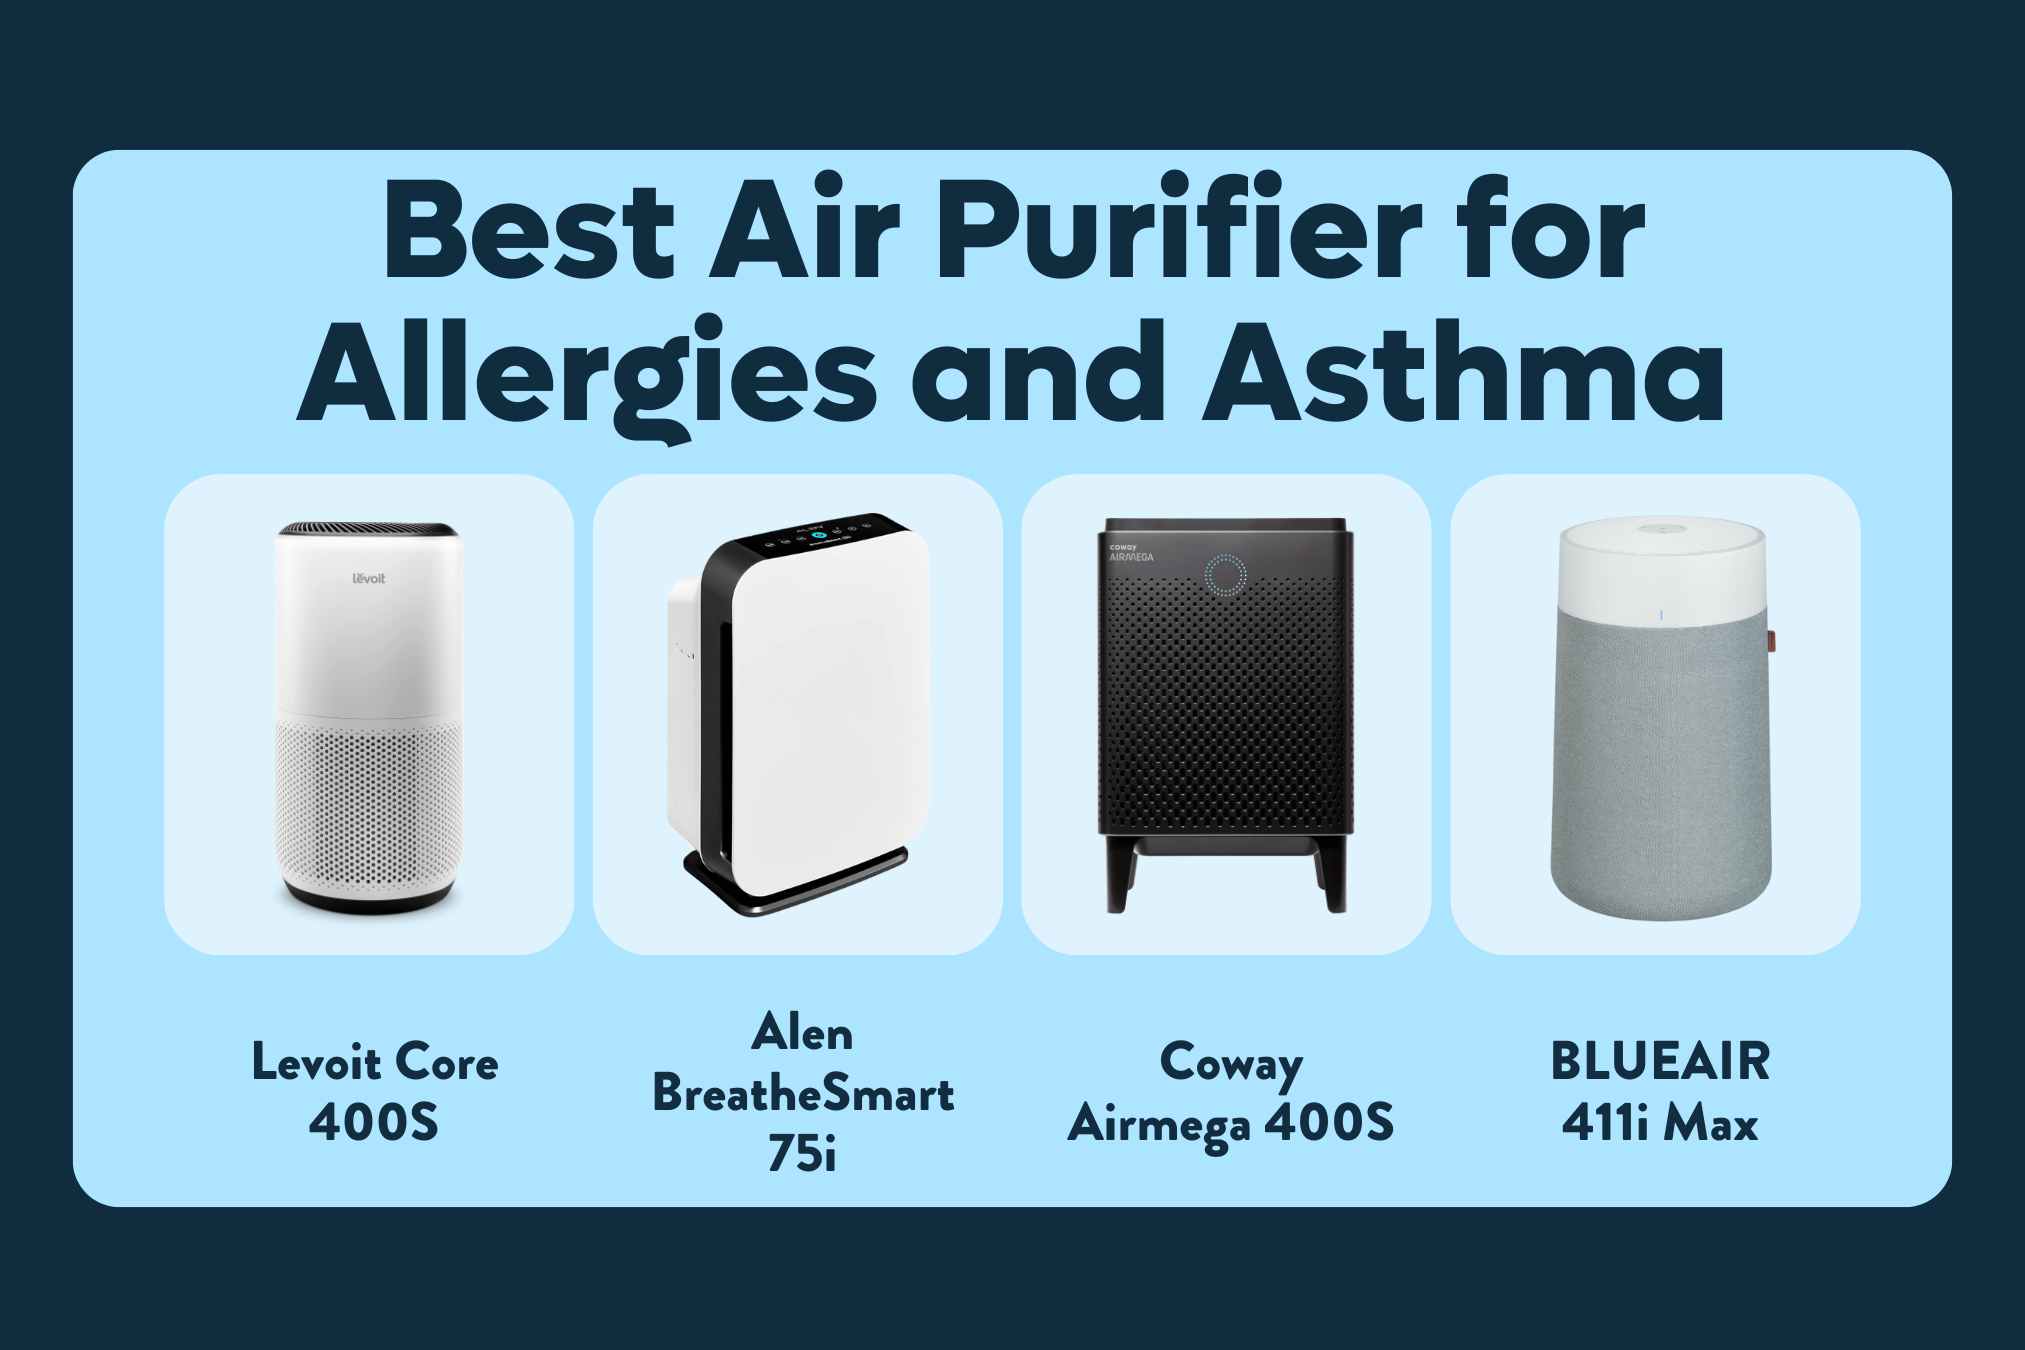 Best Air Purifier for Allergies and Asthma